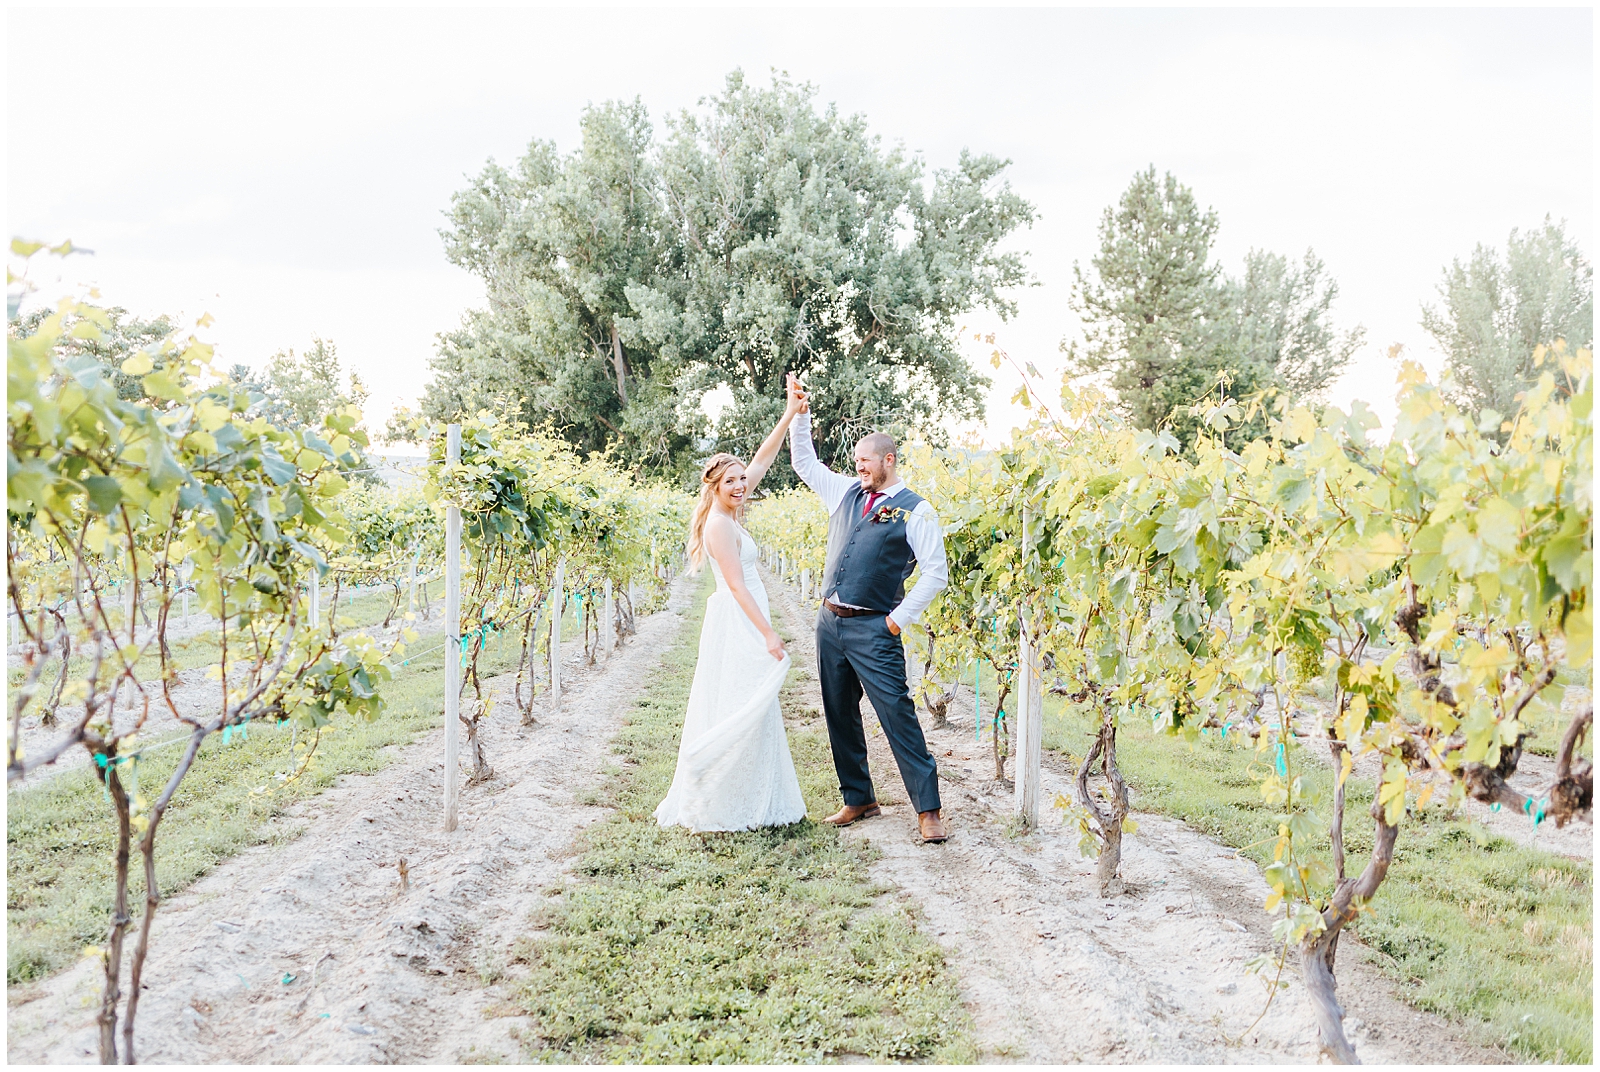 Husband and Wife Twirling in the vineyards at golden hour at Fox Canyon Vineyards Wedding